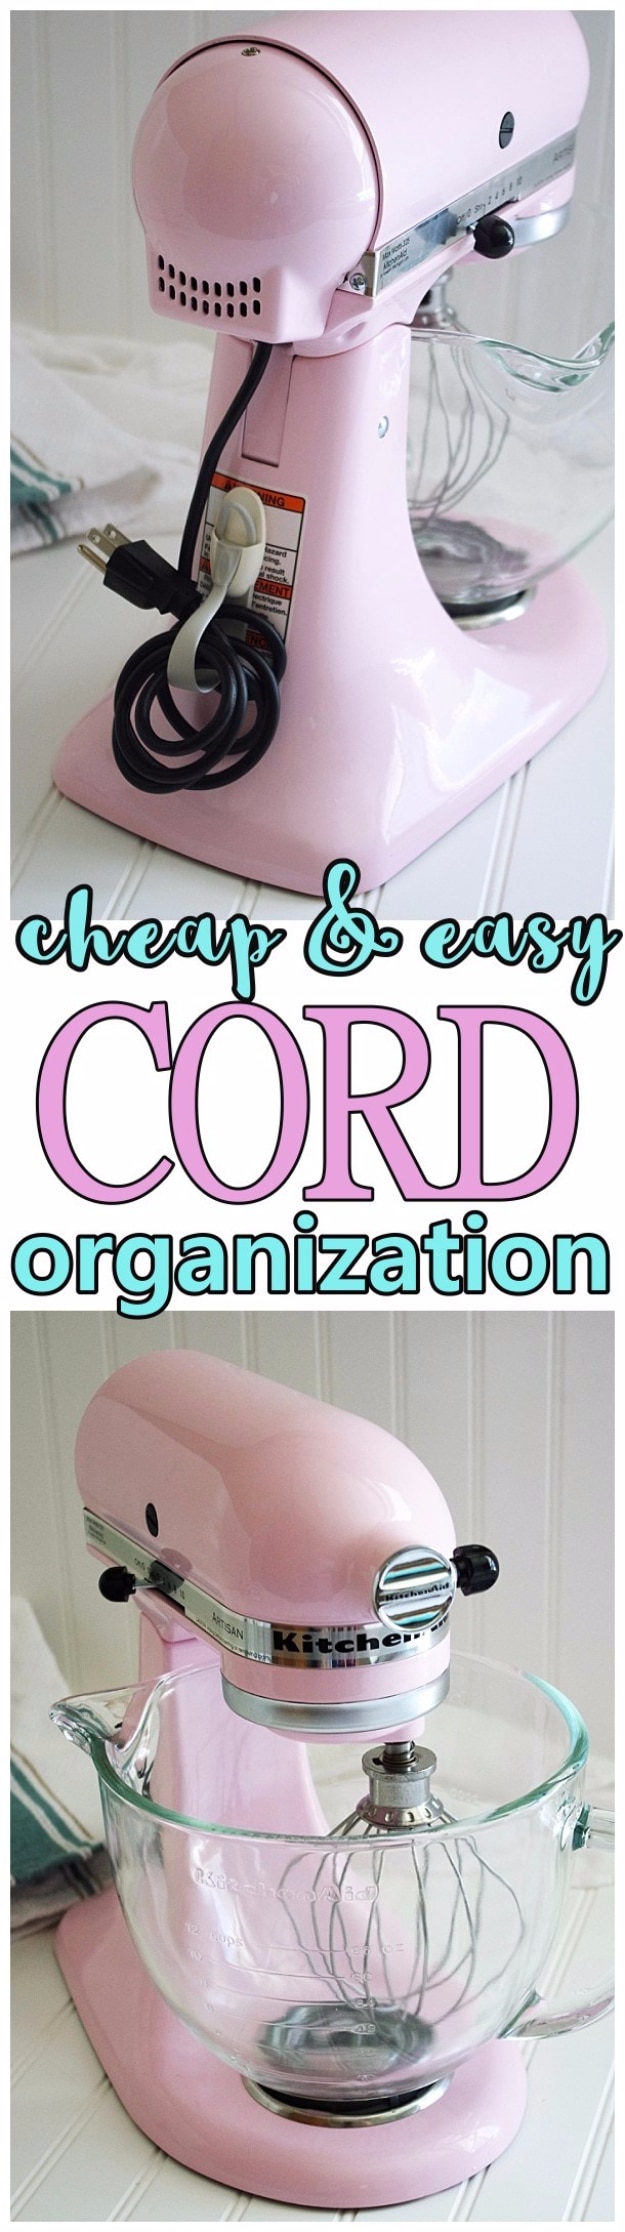 Best Organizing Ideas for the New Year - Cheap And Easy Power Tool Cord Organization - Resolutions for Getting Organized - DIY Organizing Projects for Home, Bedroom, Closet, Bath and Kitchen - Easy Ways to Organize Shoes, Clutter, Desk and Closets - DIY Projects and Crafts for Women and Men 